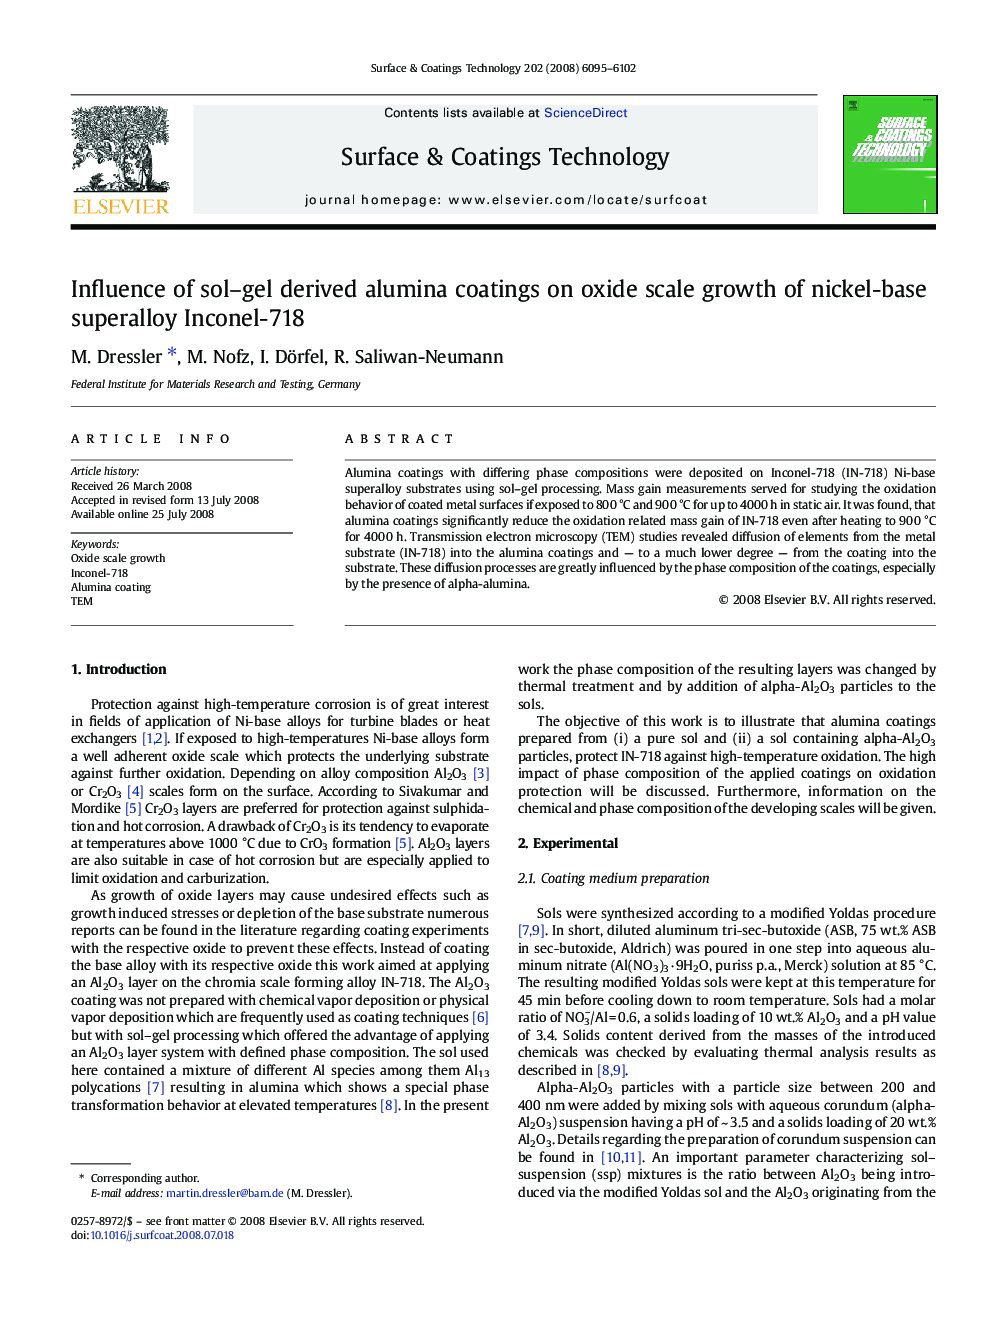 Influence of sol-gel derived alumina coatings on oxide scale growth of nickel-base superalloy Inconel-718